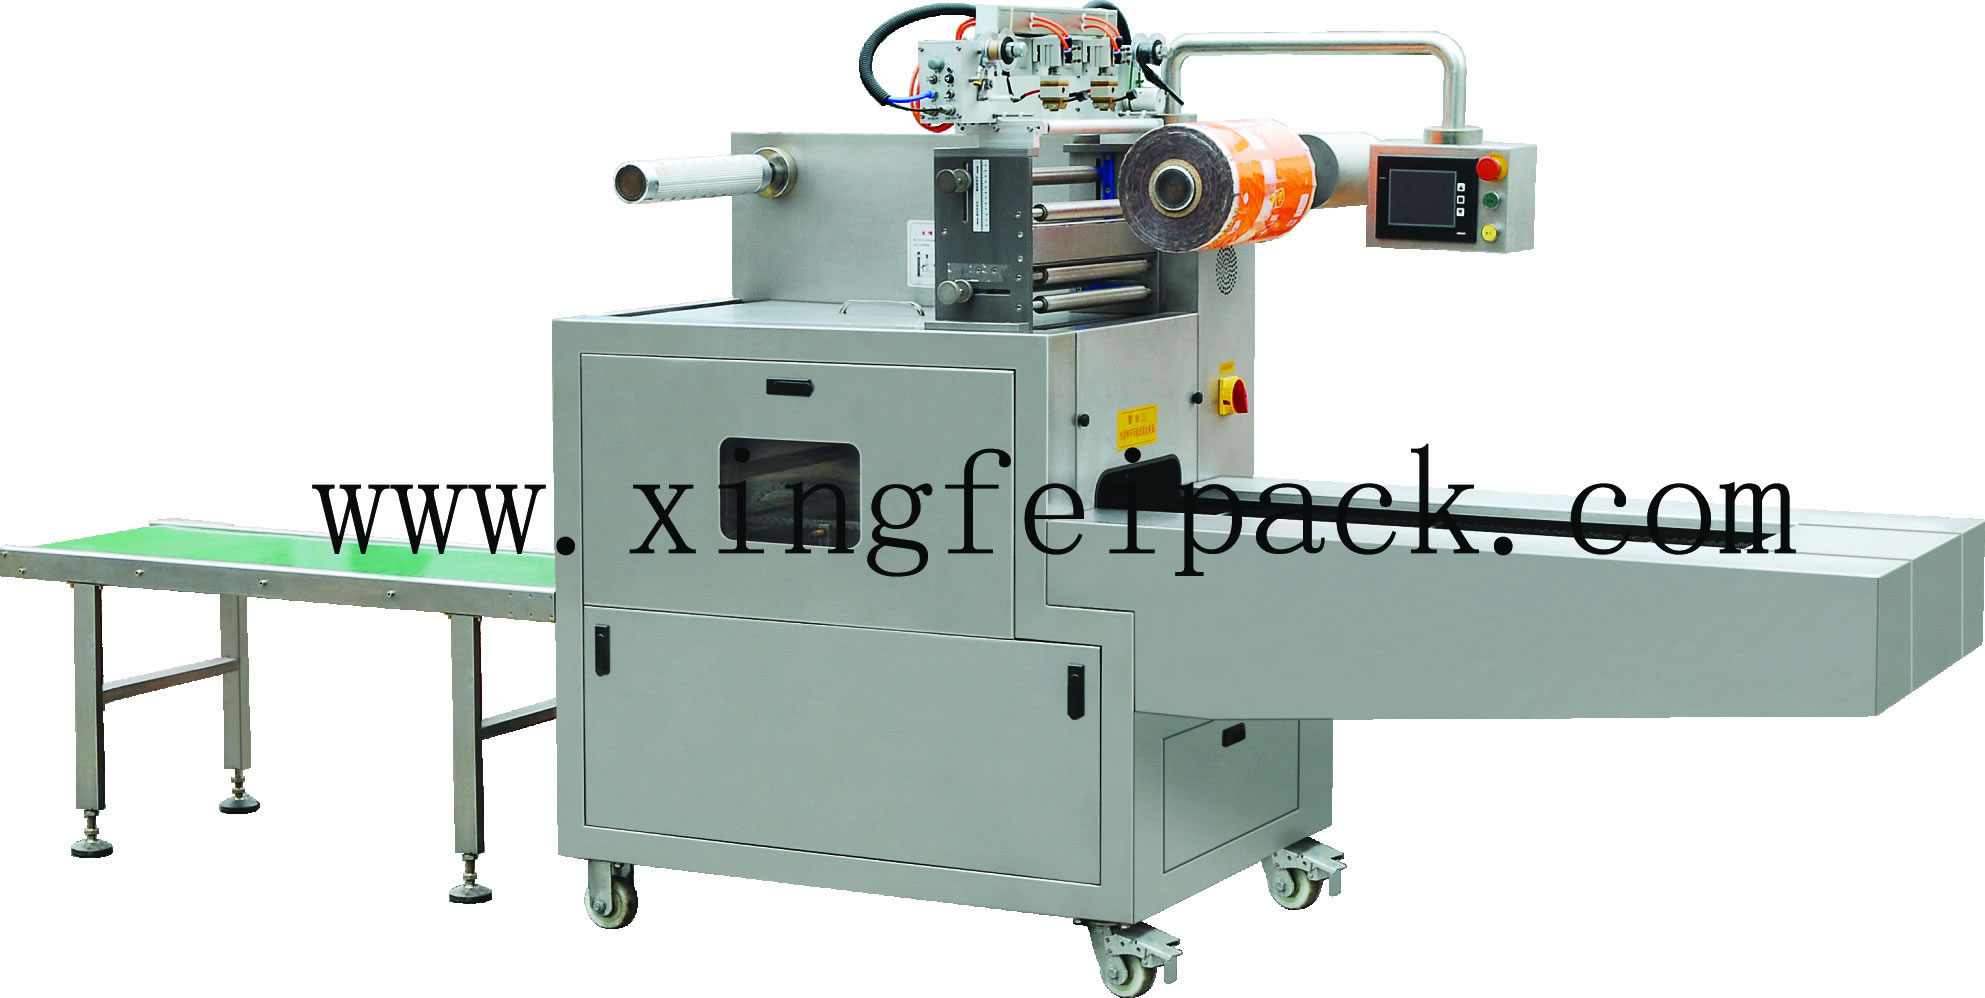 Automatic Modified Atmosphere Packing Machine (XF-MAP)